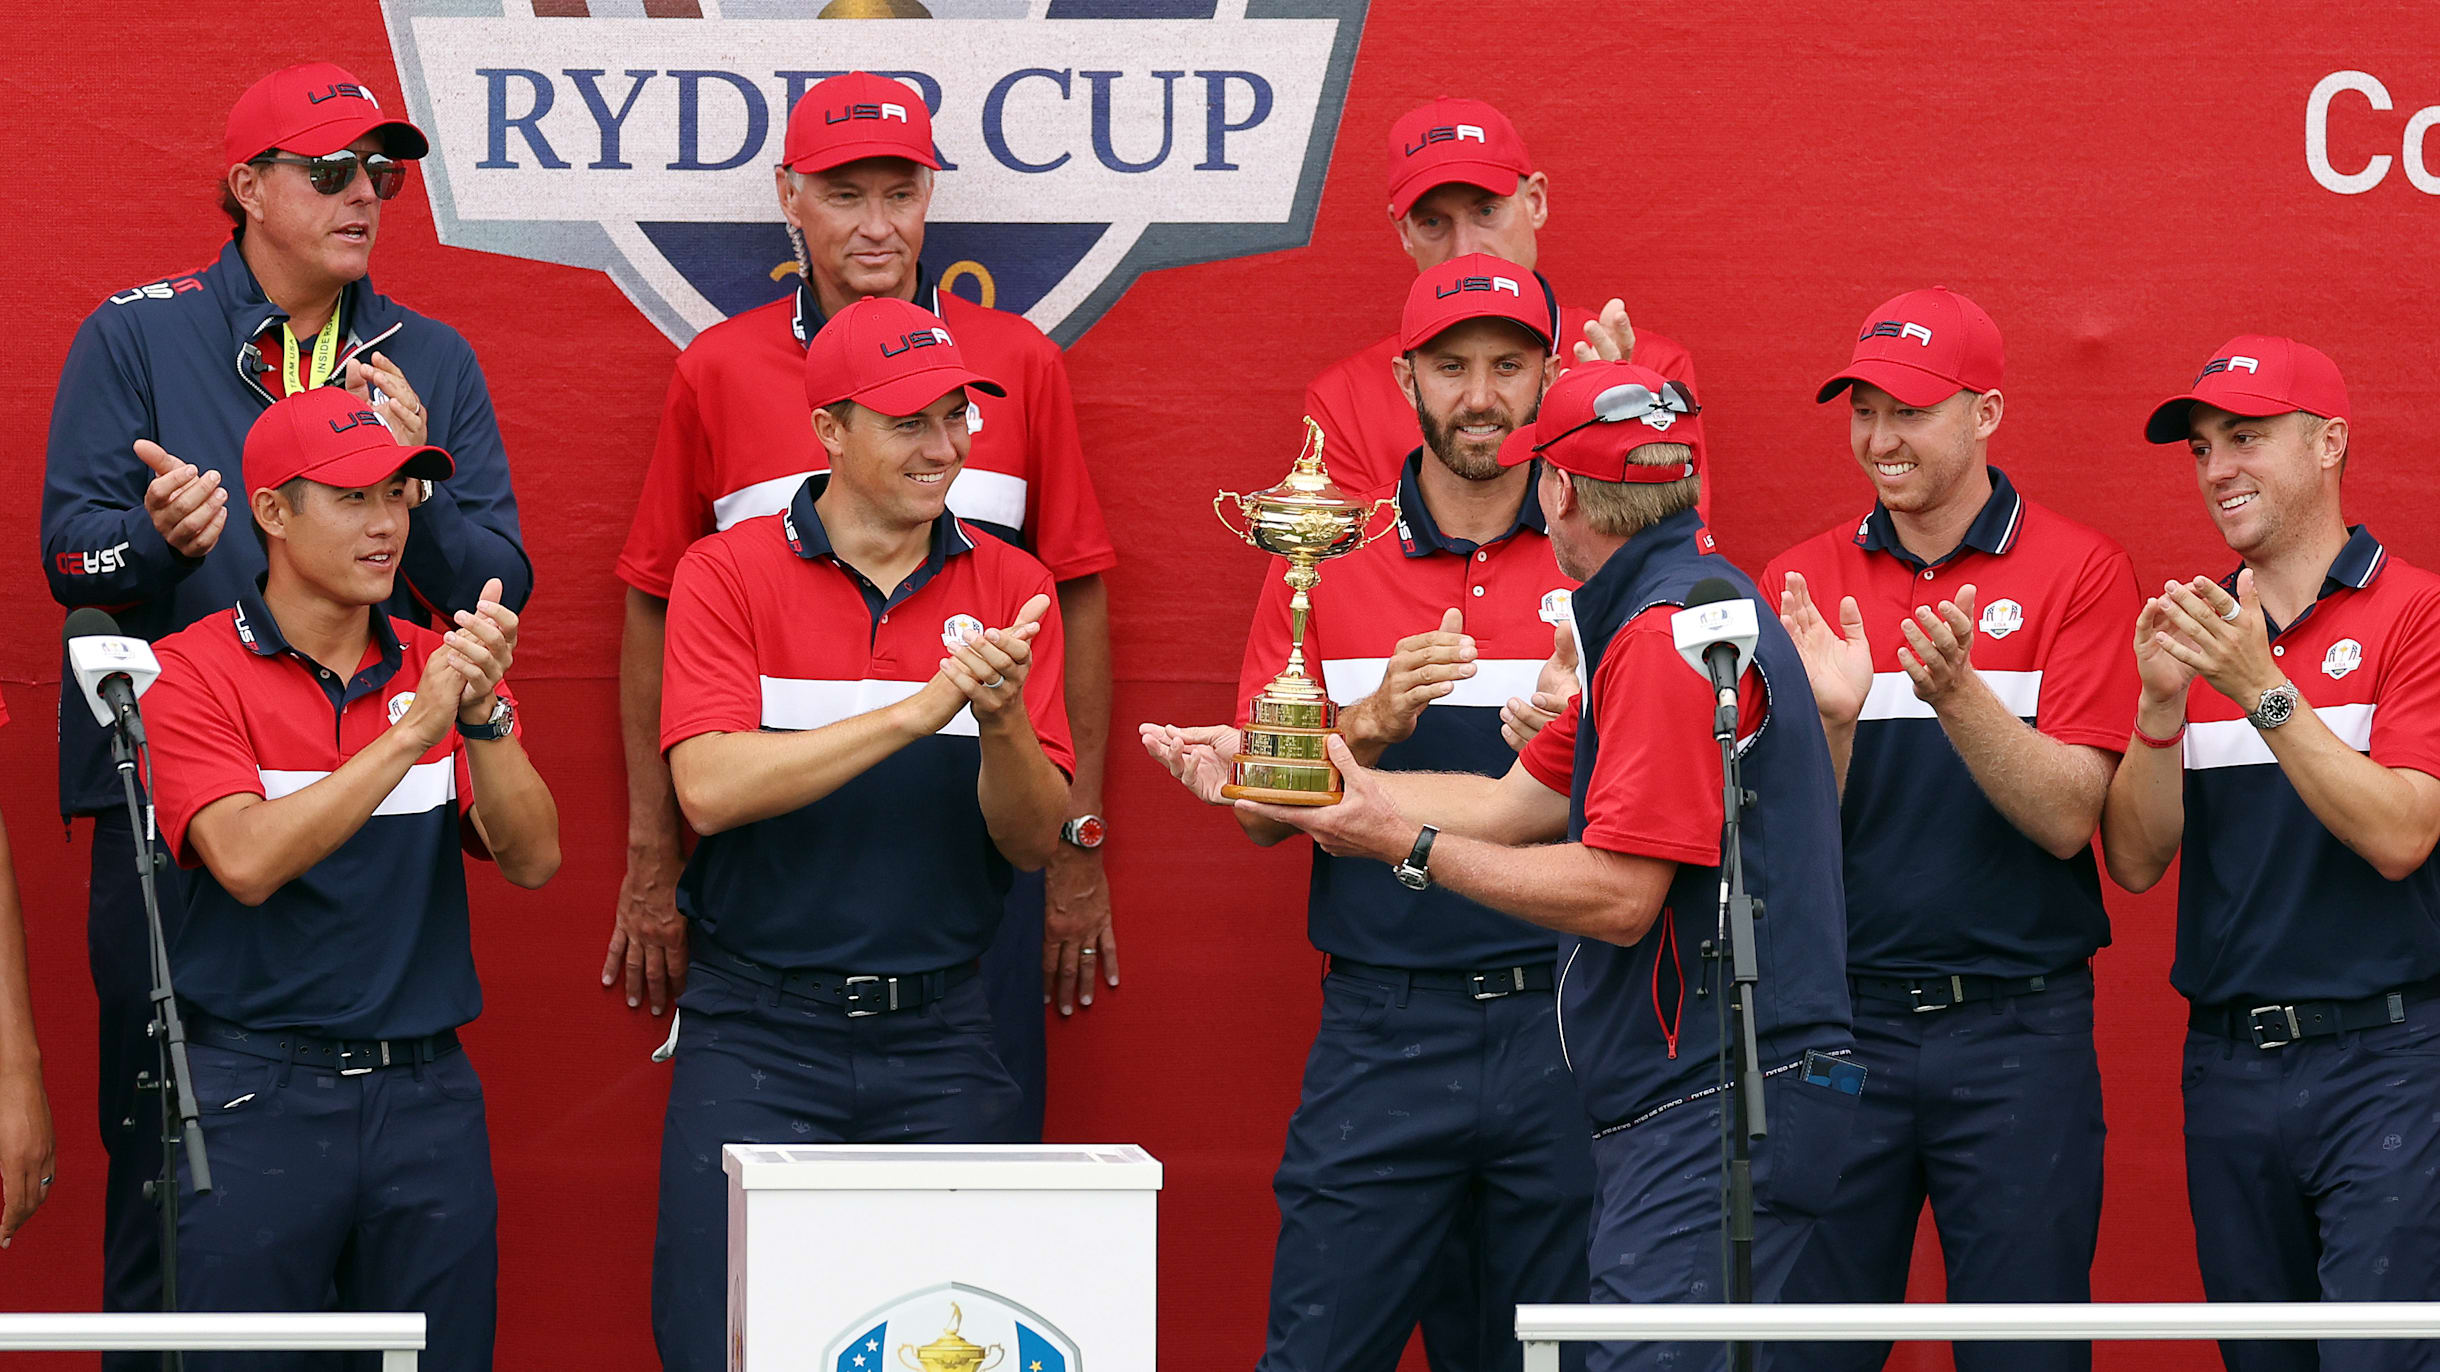 Ryder Cup 2023 Preview, full schedule, and how to watch live as Europe play USA in the mens team golf event